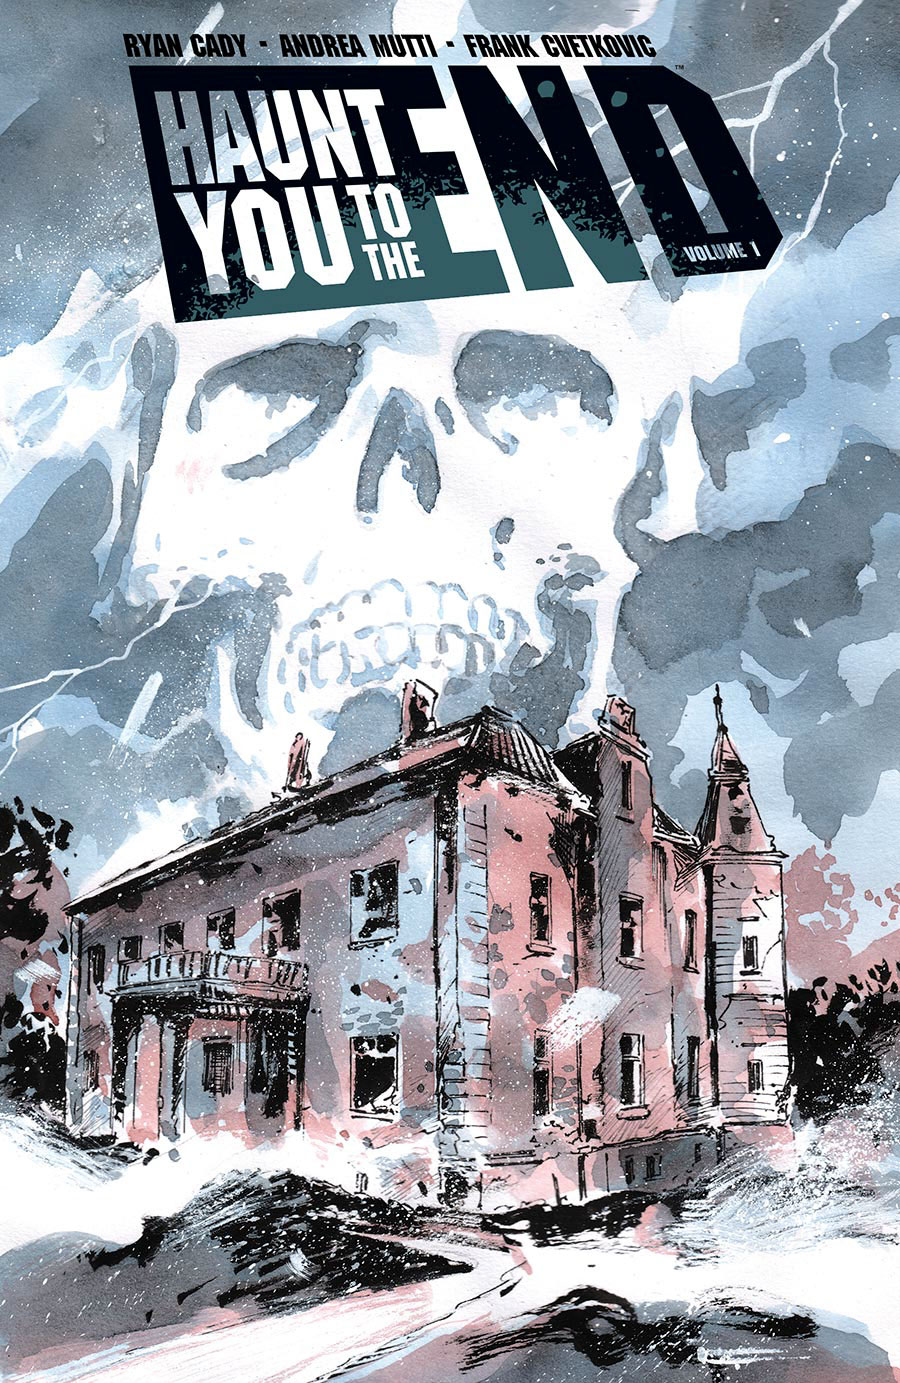 Haunt You To The End Vol 1 TP